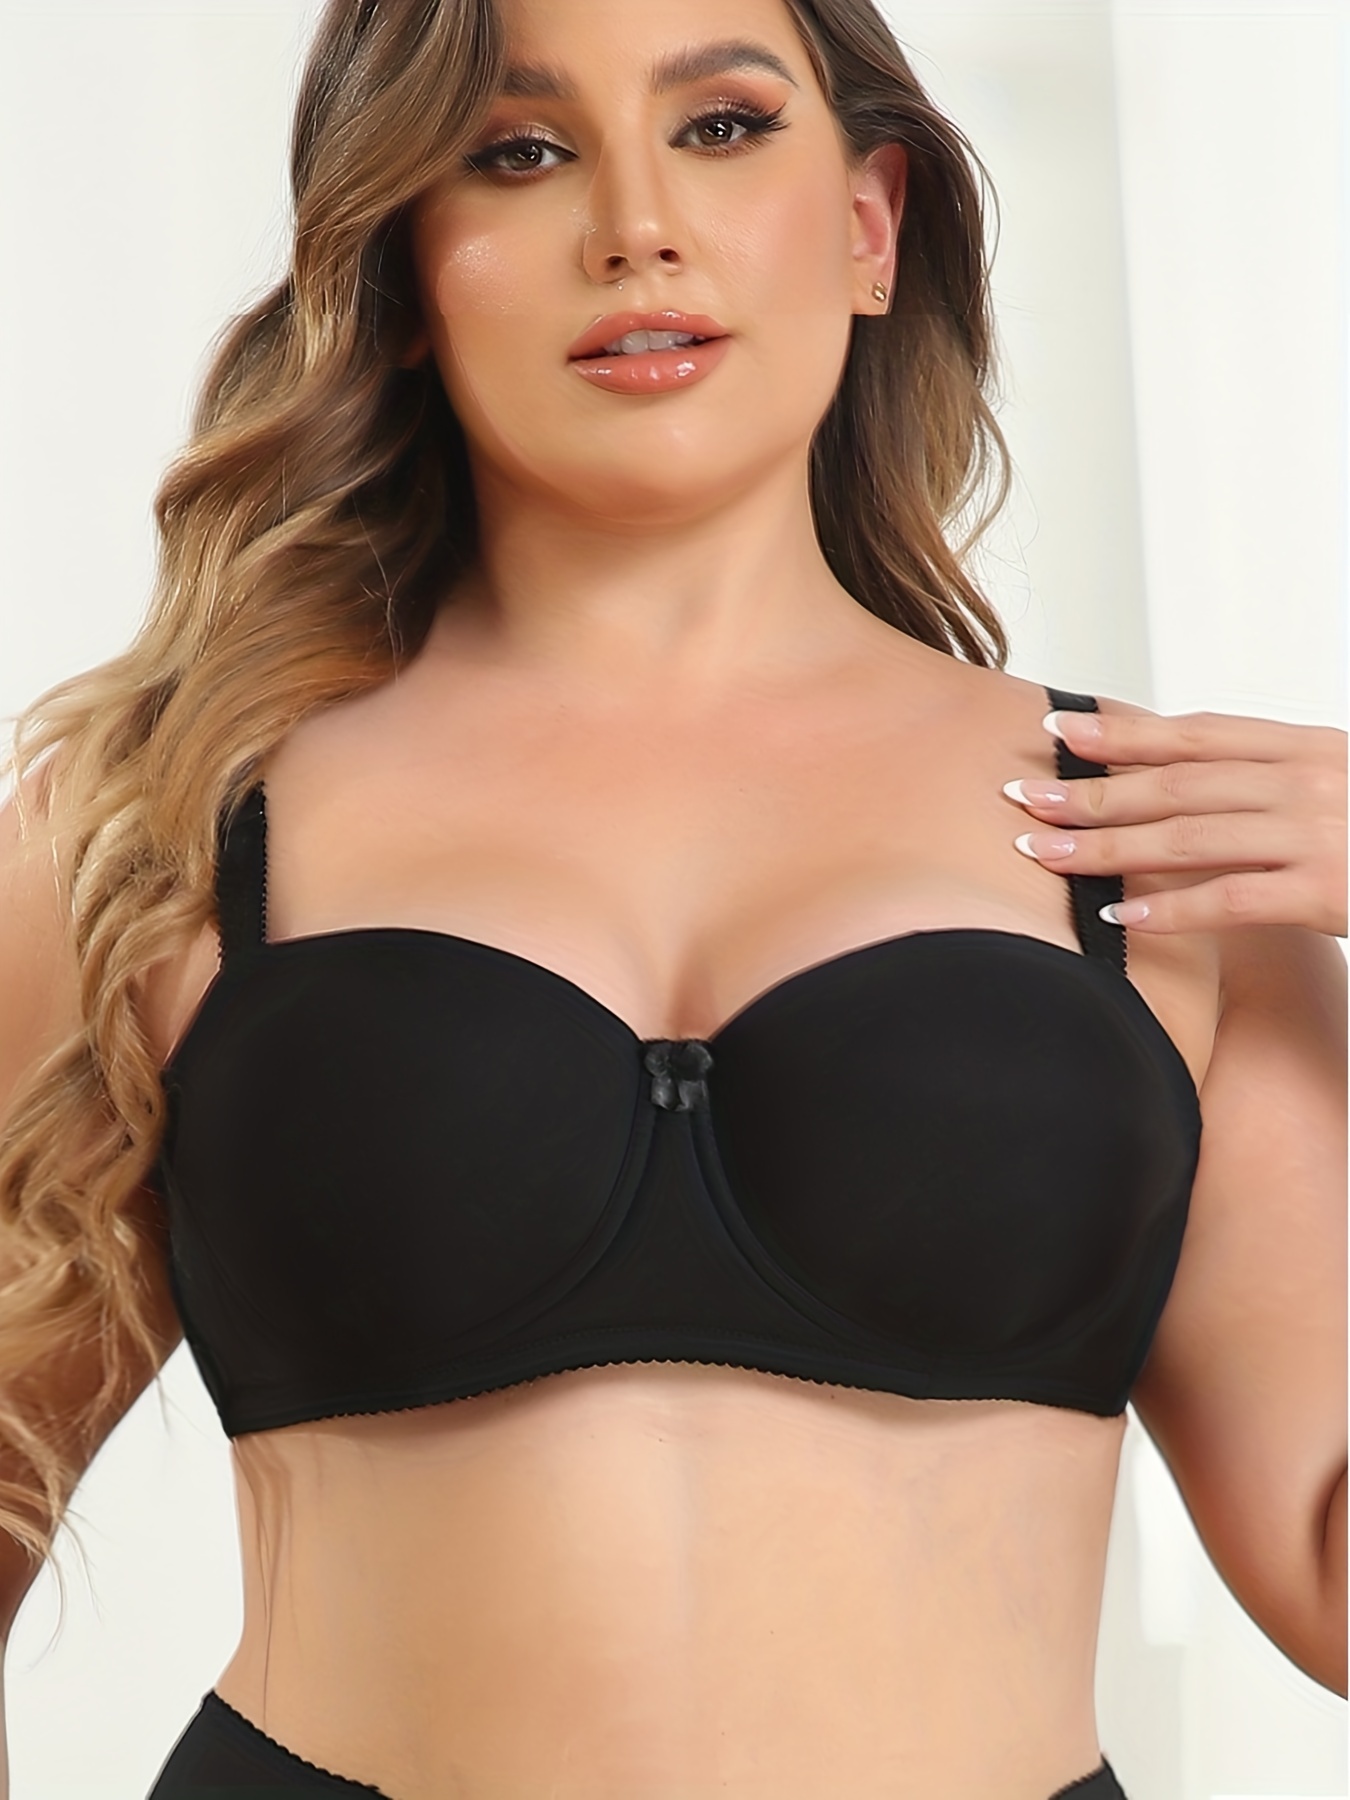 Seamless And Breathable Plus Size Brassiere Crop Top With Padded Wire For  Women Comfortable And Cheap Sexy Bras Model 231030 From Bai04, $10.14